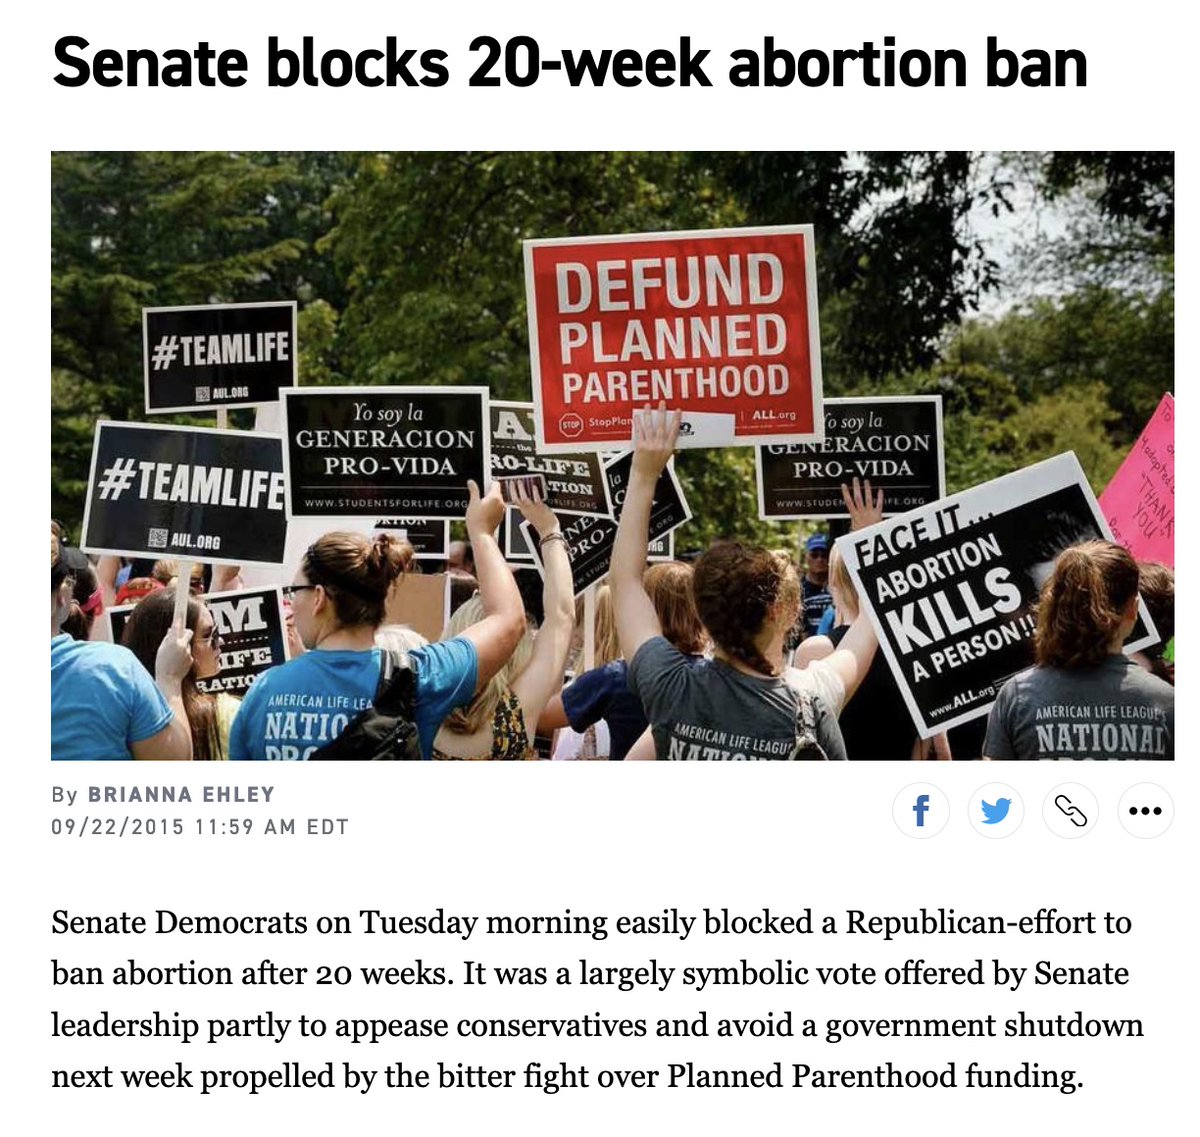 Important dynamic! Yes, 'leave it to the states' was a talking point — a disingenuous one. Every House and/or Senate GOP majority in recent memory has pushed FEDERAL abortion restrictions; nearly every R has voted yes & pro-life groups backed this. Trump endorsed a 20-week ban.